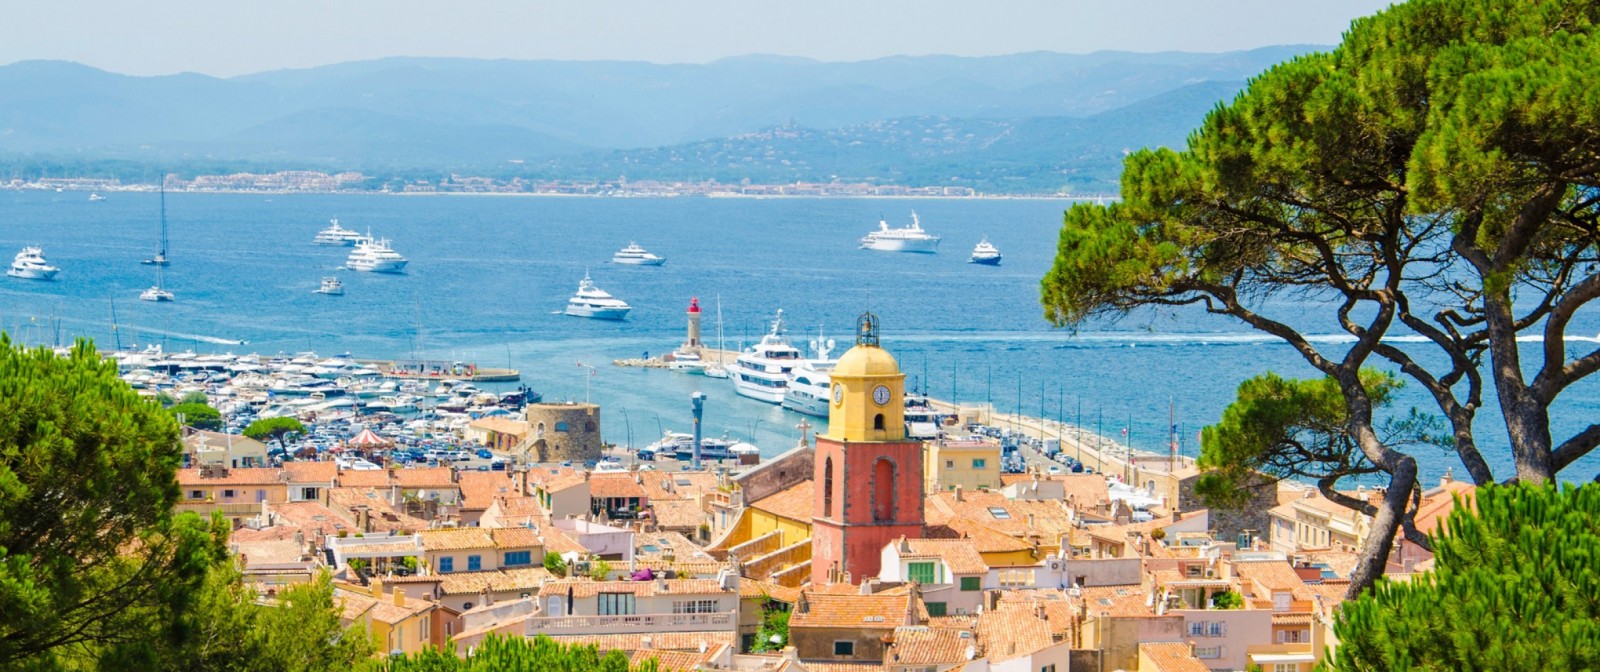 Private Chauffeur for MIPTV event in Cannes - Premium Vehicles & Services - Reactivity 24/7 - Ruby Services - Car Rental with Driver for MIPTV in Cannes